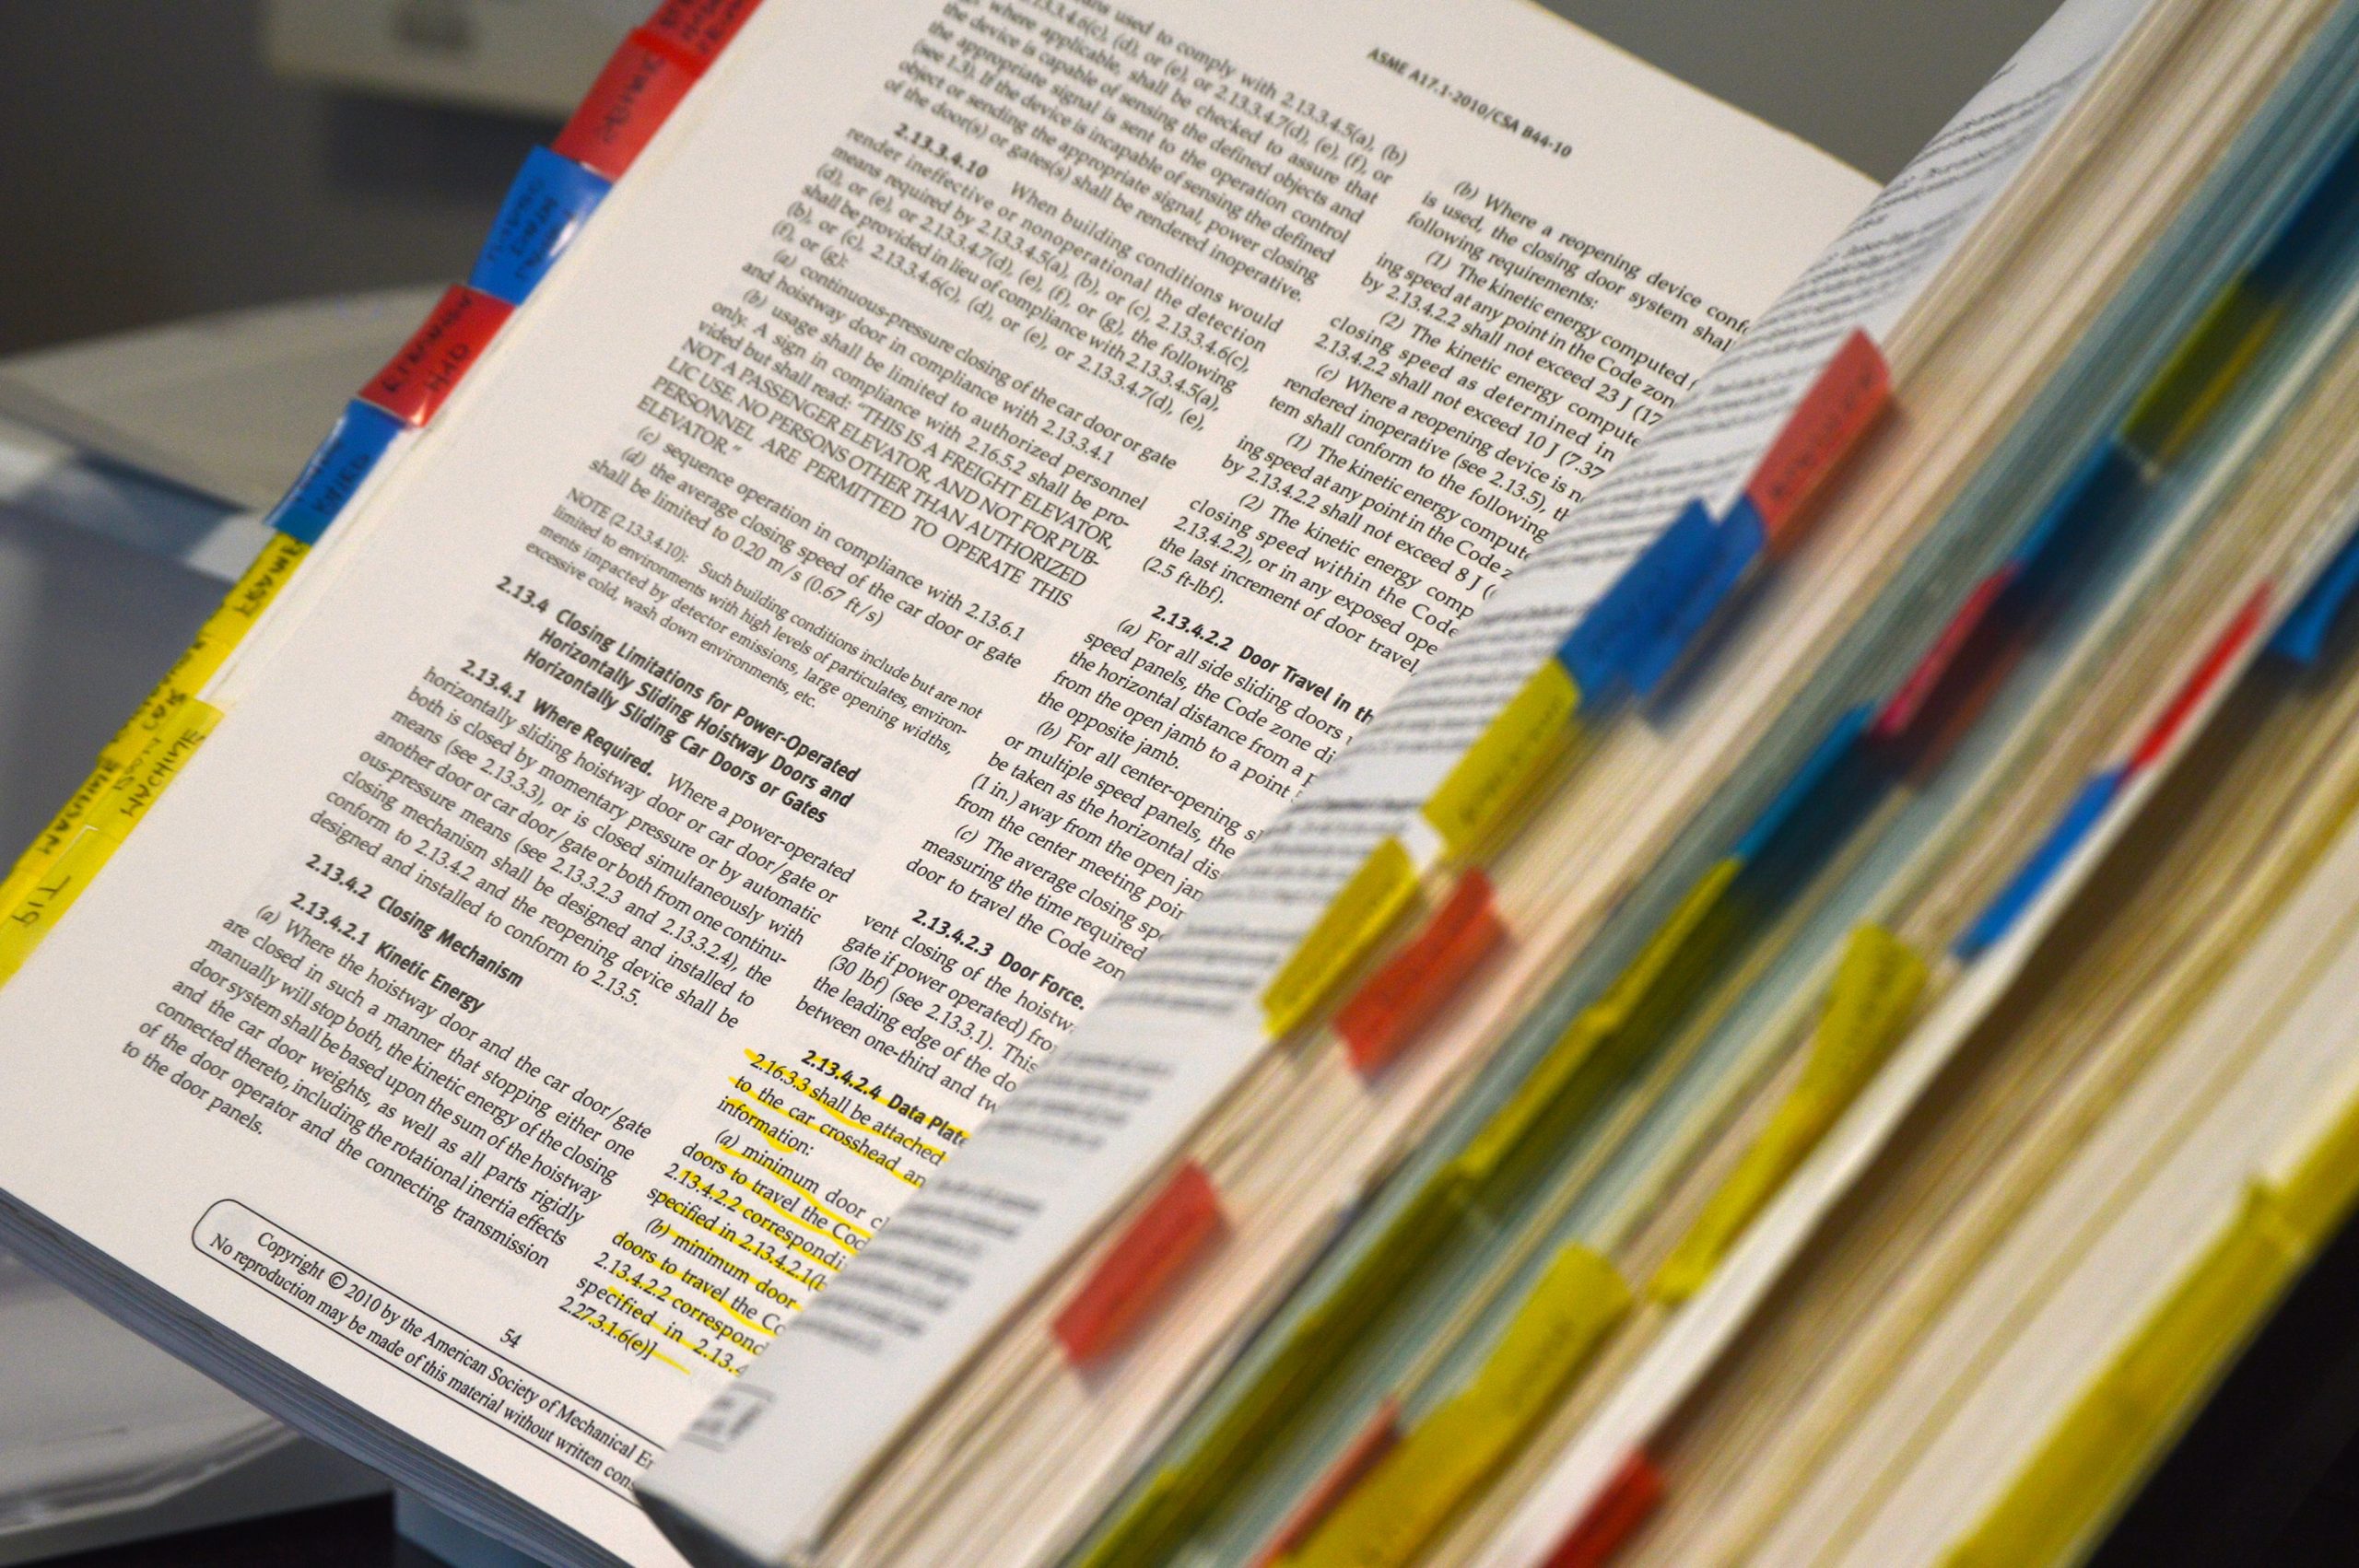 An open book with many colourful tags to mark pages